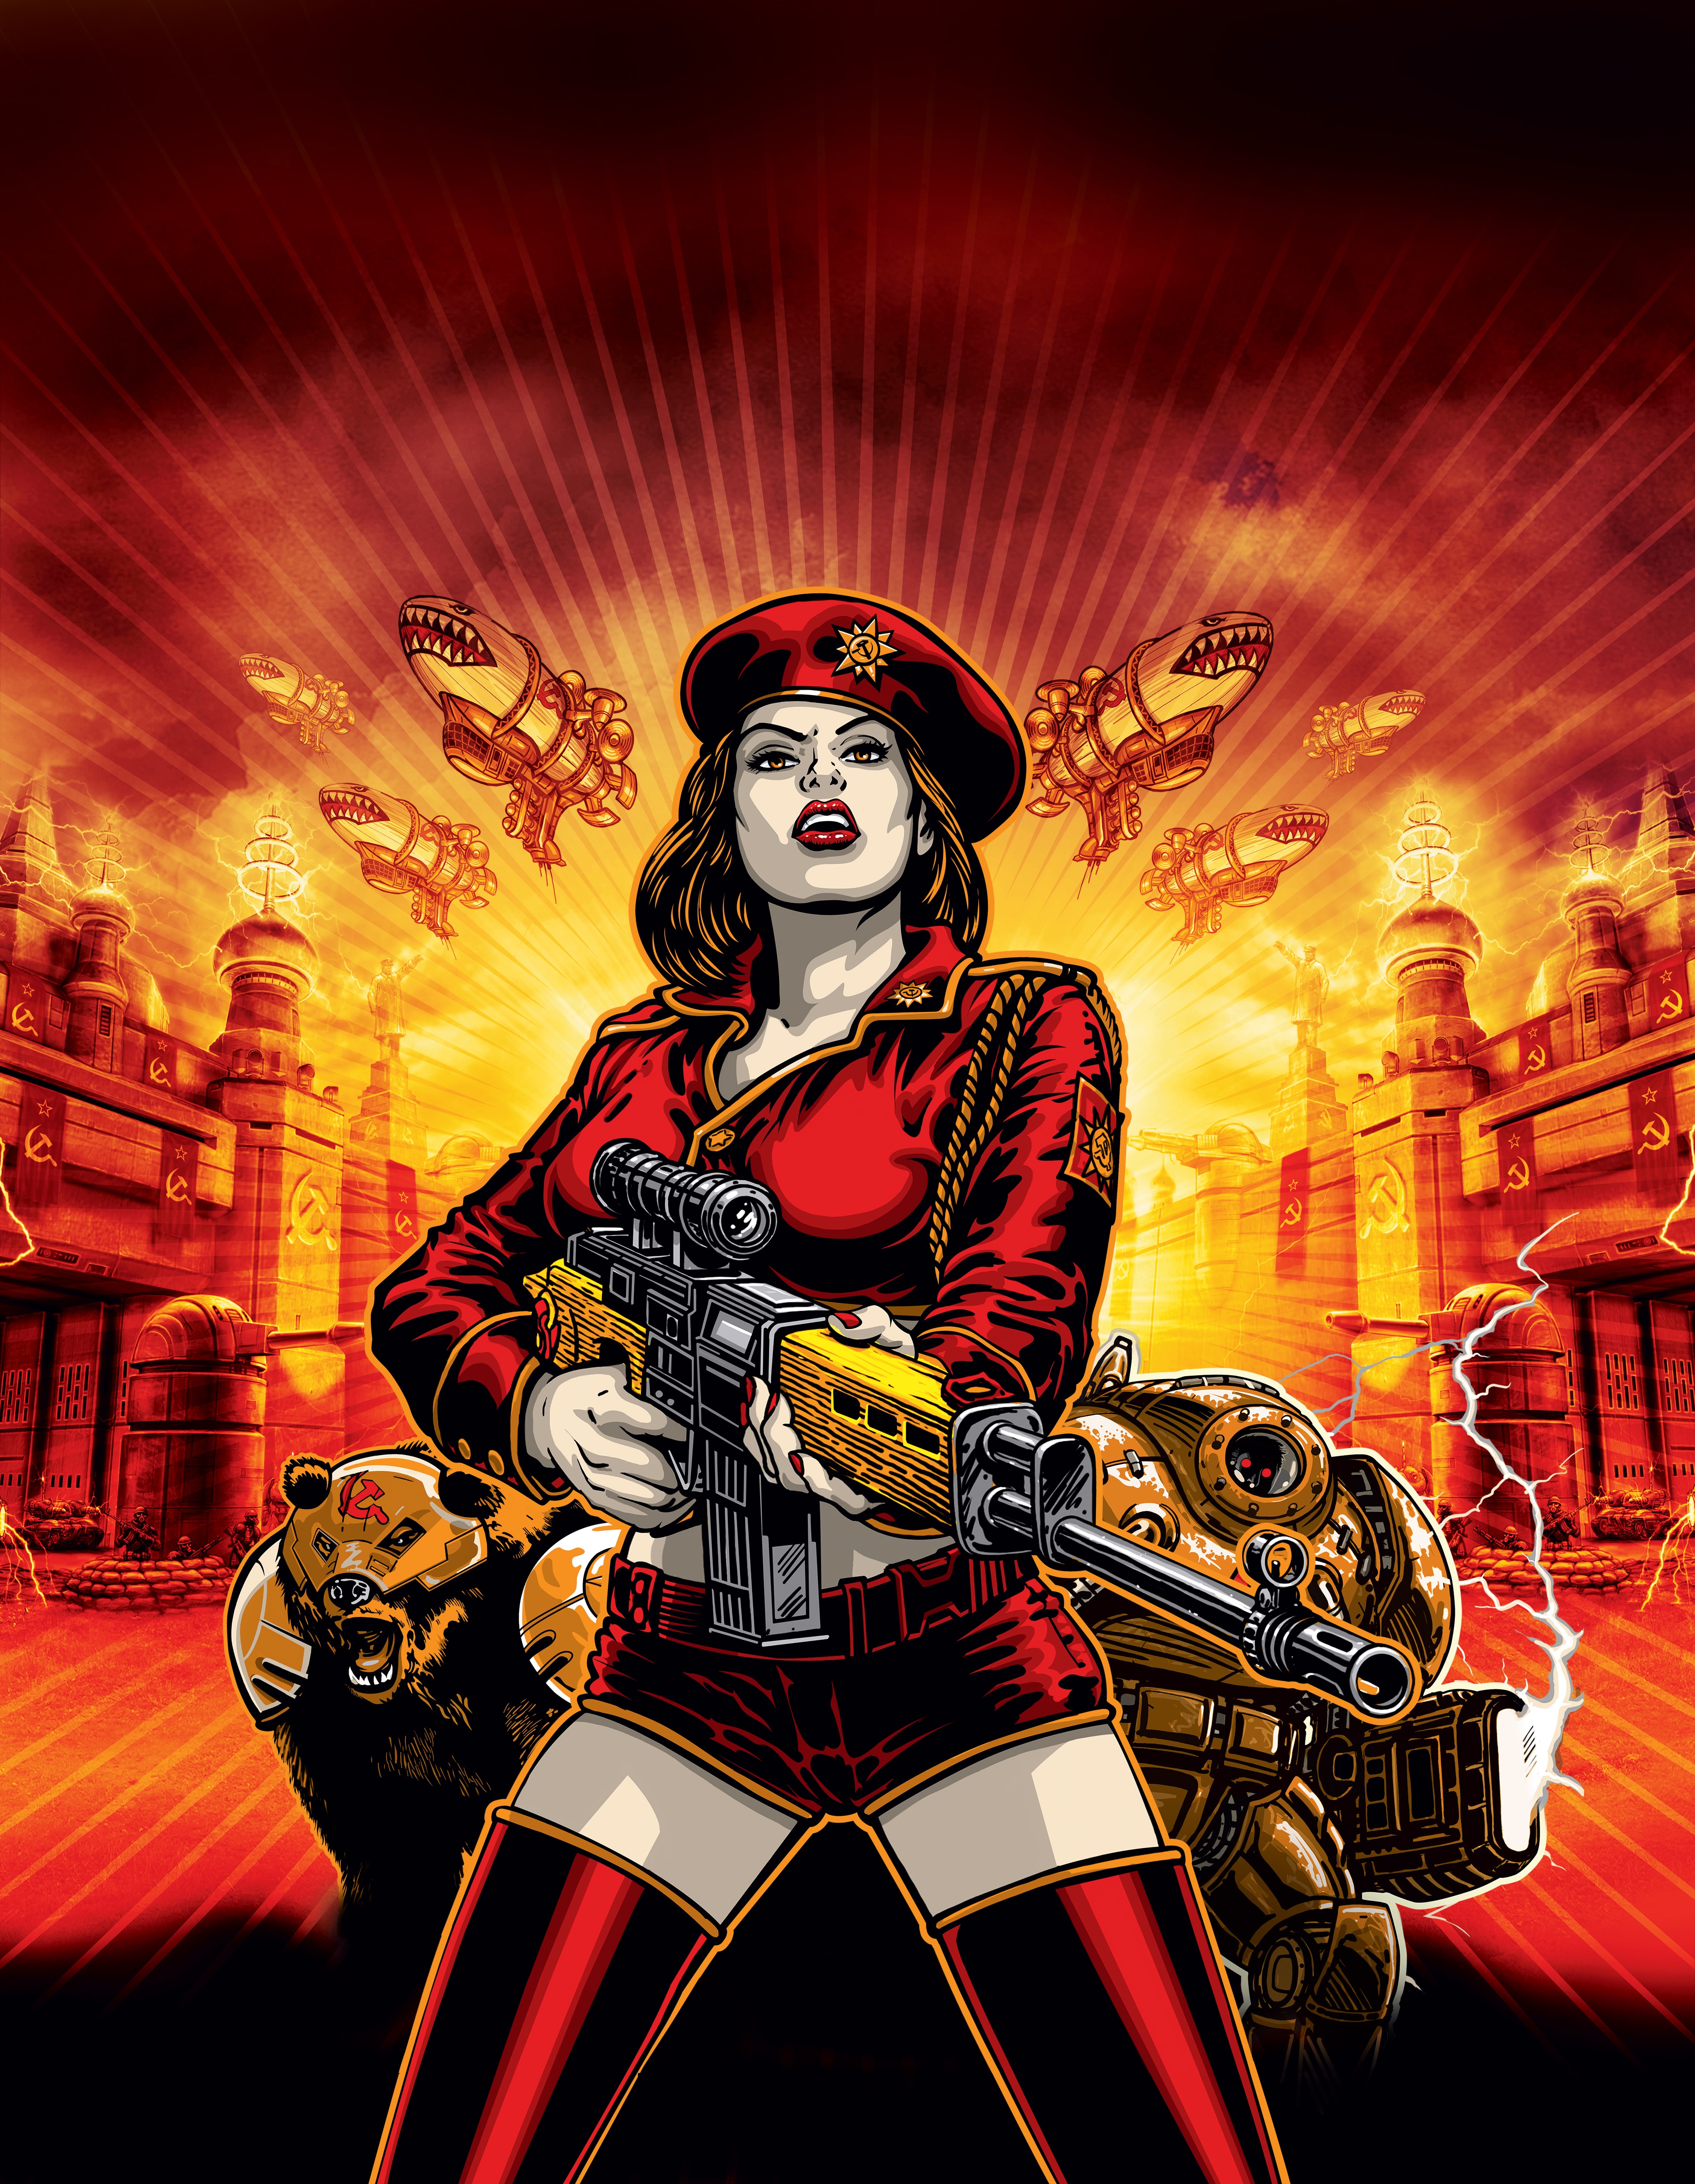 command and conquer red alert 4 release date